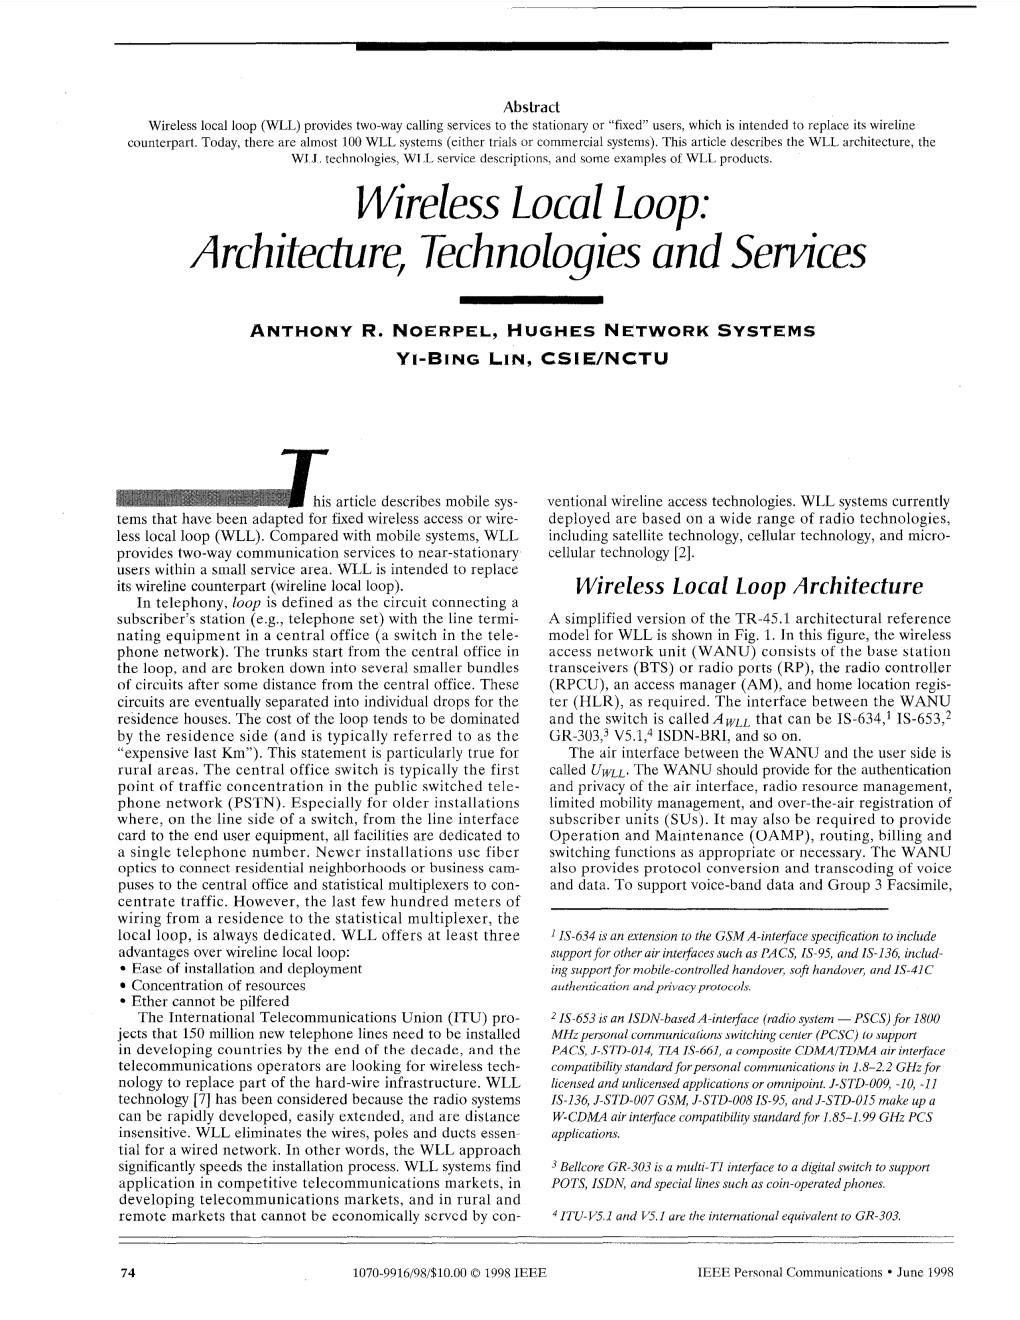 Wireless Local Loop: Architecture Technologies and Services